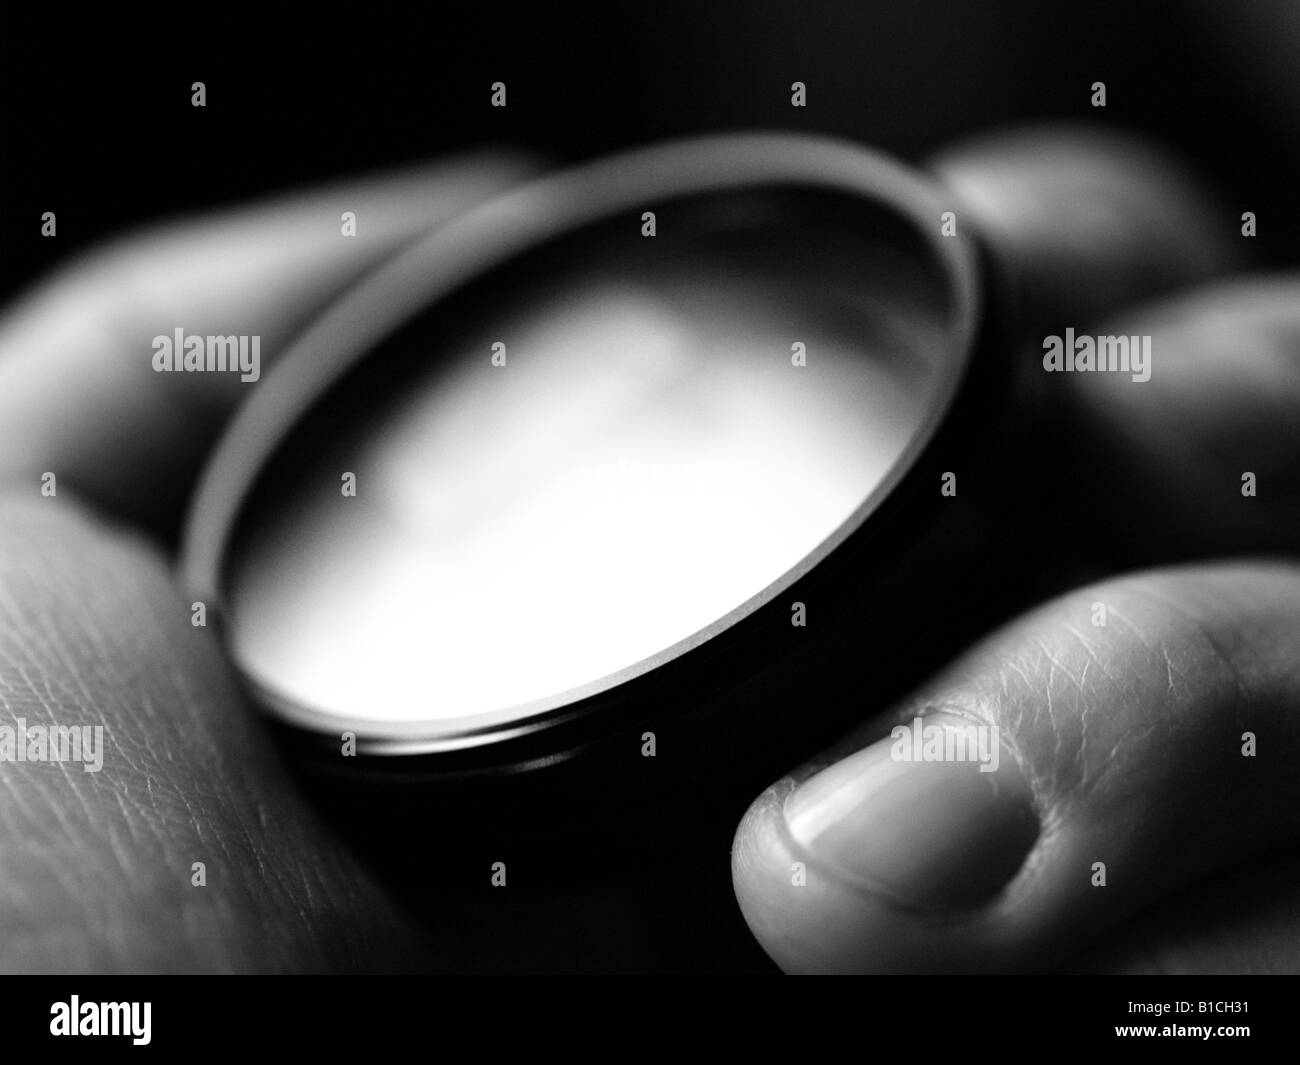 Black and white close-up of hand holding a UV filter lens. Stock Photo